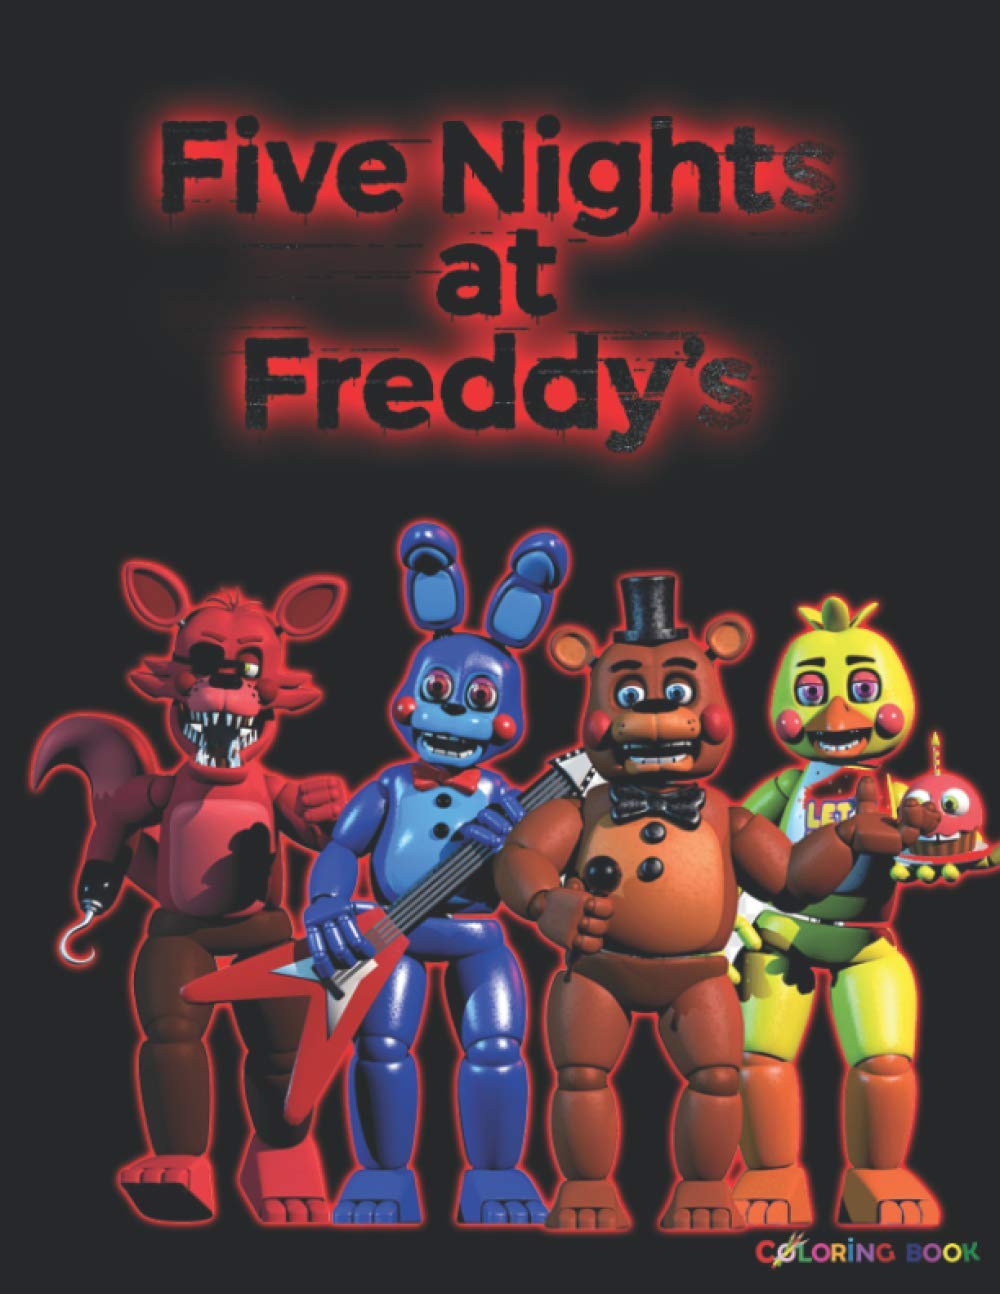 Will there be a new FNAF game after Security Breach? - GameRevolution